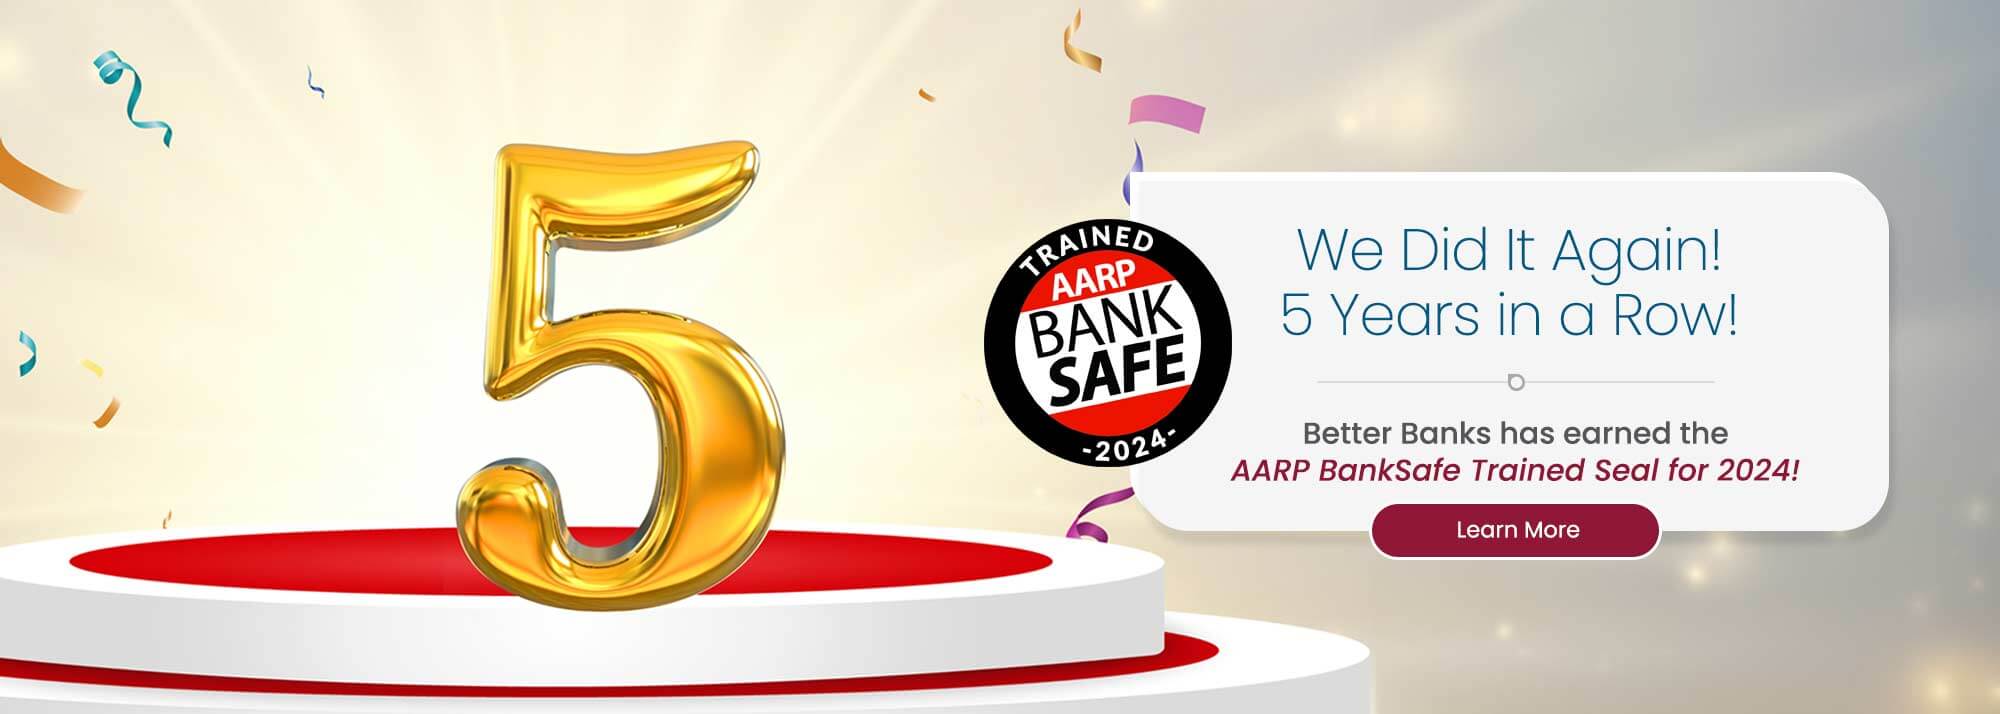 We Did It Again! 5 Years in a Row! Better Banks has earned the AARP BankSafe Trained Seal for 2024! Learn More